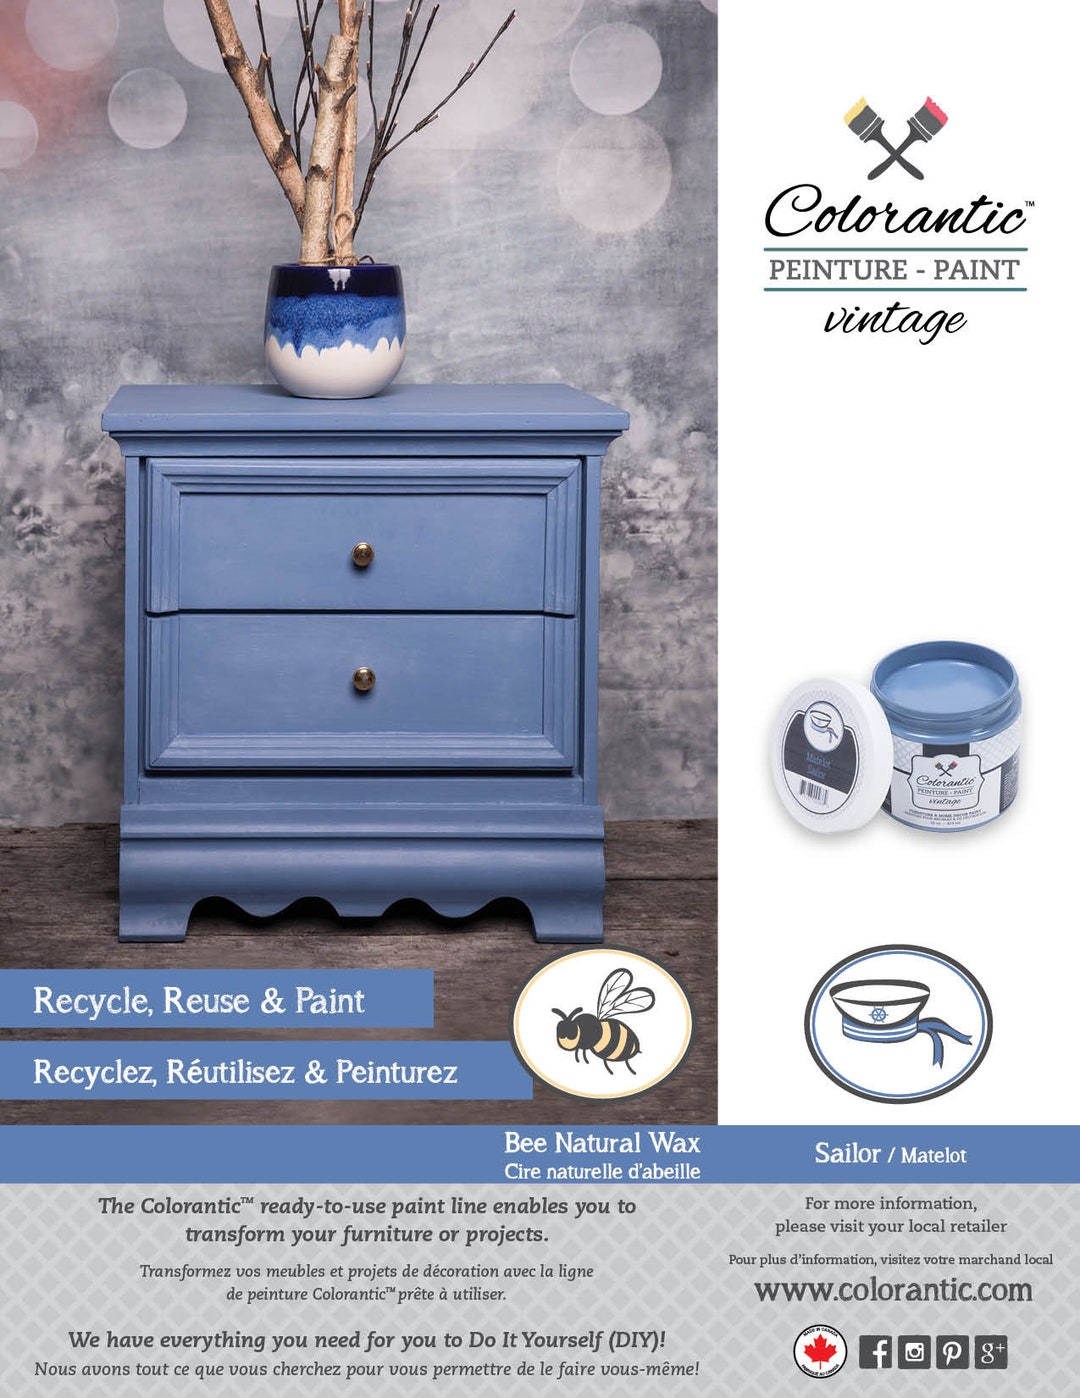  Colorantic  MIST Grey Furniture Chalk Based Paint for